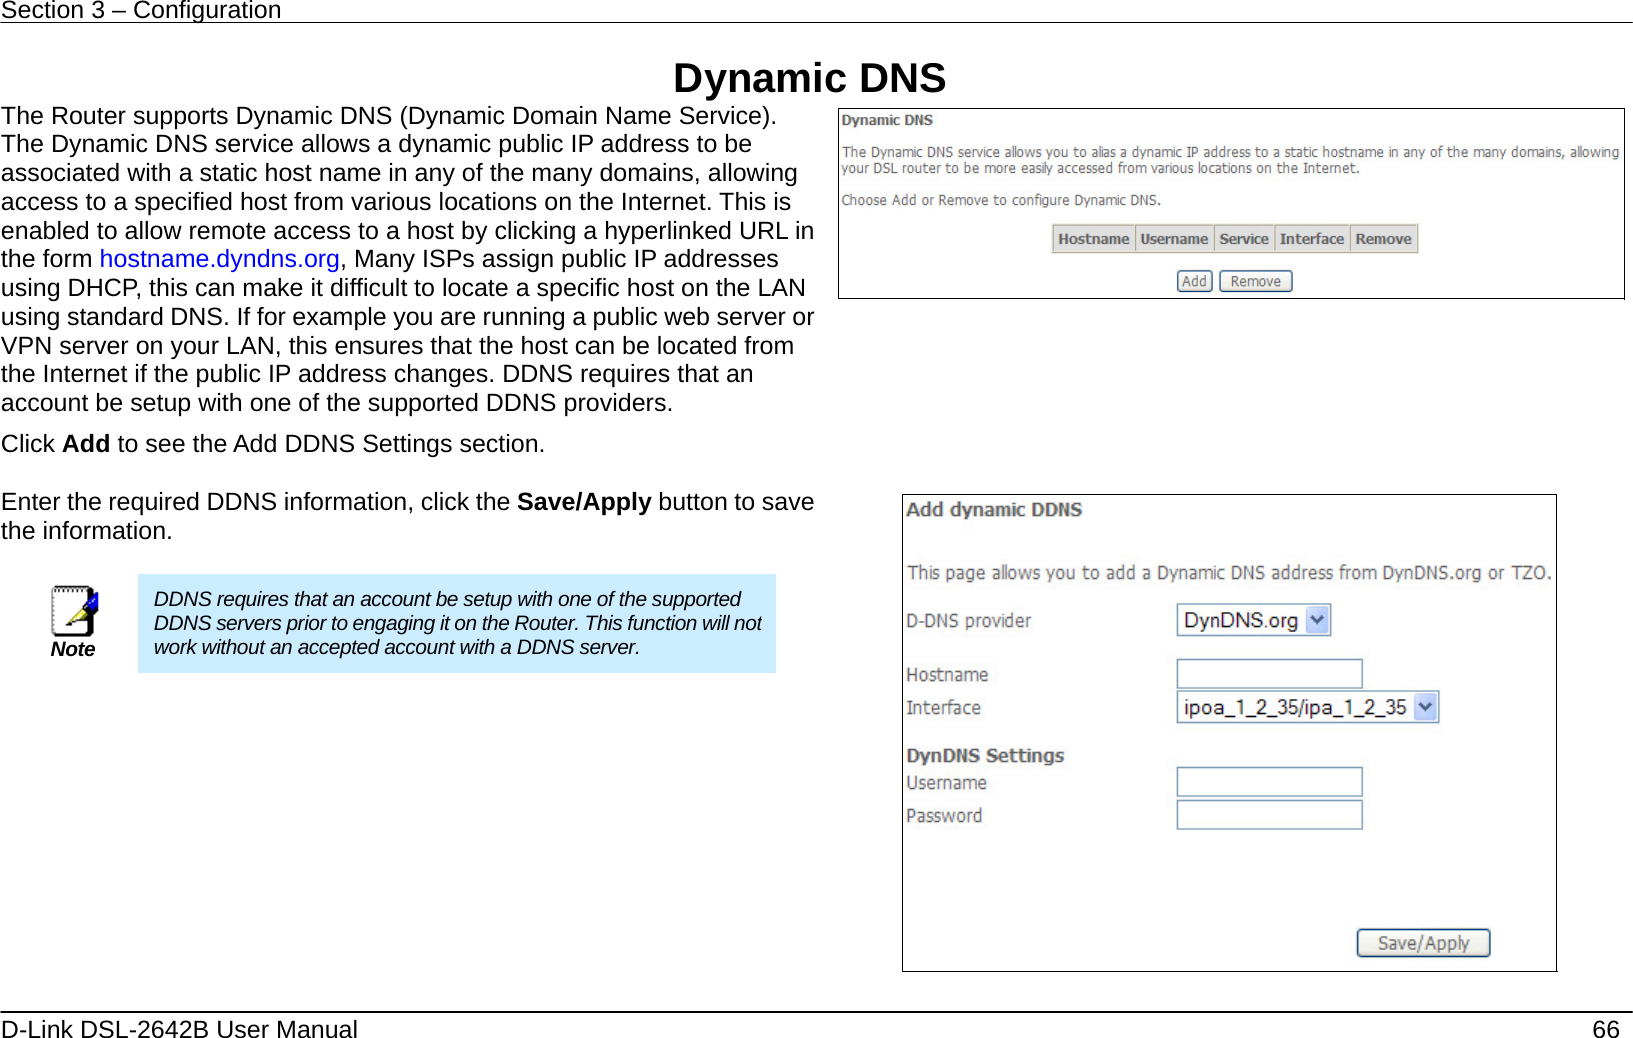 Section 3 – Configuration   D-Link DSL-2642B User Manual    66 Dynamic DNS The Router supports Dynamic DNS (Dynamic Domain Name Service). The Dynamic DNS service allows a dynamic public IP address to be associated with a static host name in any of the many domains, allowing access to a specified host from various locations on the Internet. This is enabled to allow remote access to a host by clicking a hyperlinked URL in the form hostname.dyndns.org, Many ISPs assign public IP addresses using DHCP, this can make it difficult to locate a specific host on the LAN using standard DNS. If for example you are running a public web server or VPN server on your LAN, this ensures that the host can be located from the Internet if the public IP address changes. DDNS requires that an account be setup with one of the supported DDNS providers. Click Add to see the Add DDNS Settings section.       Enter the required DDNS information, click the Save/Apply button to save the information.   Note DDNS requires that an account be setup with one of the supported DDNS servers prior to engaging it on the Router. This function will not work without an accepted account with a DDNS server.    